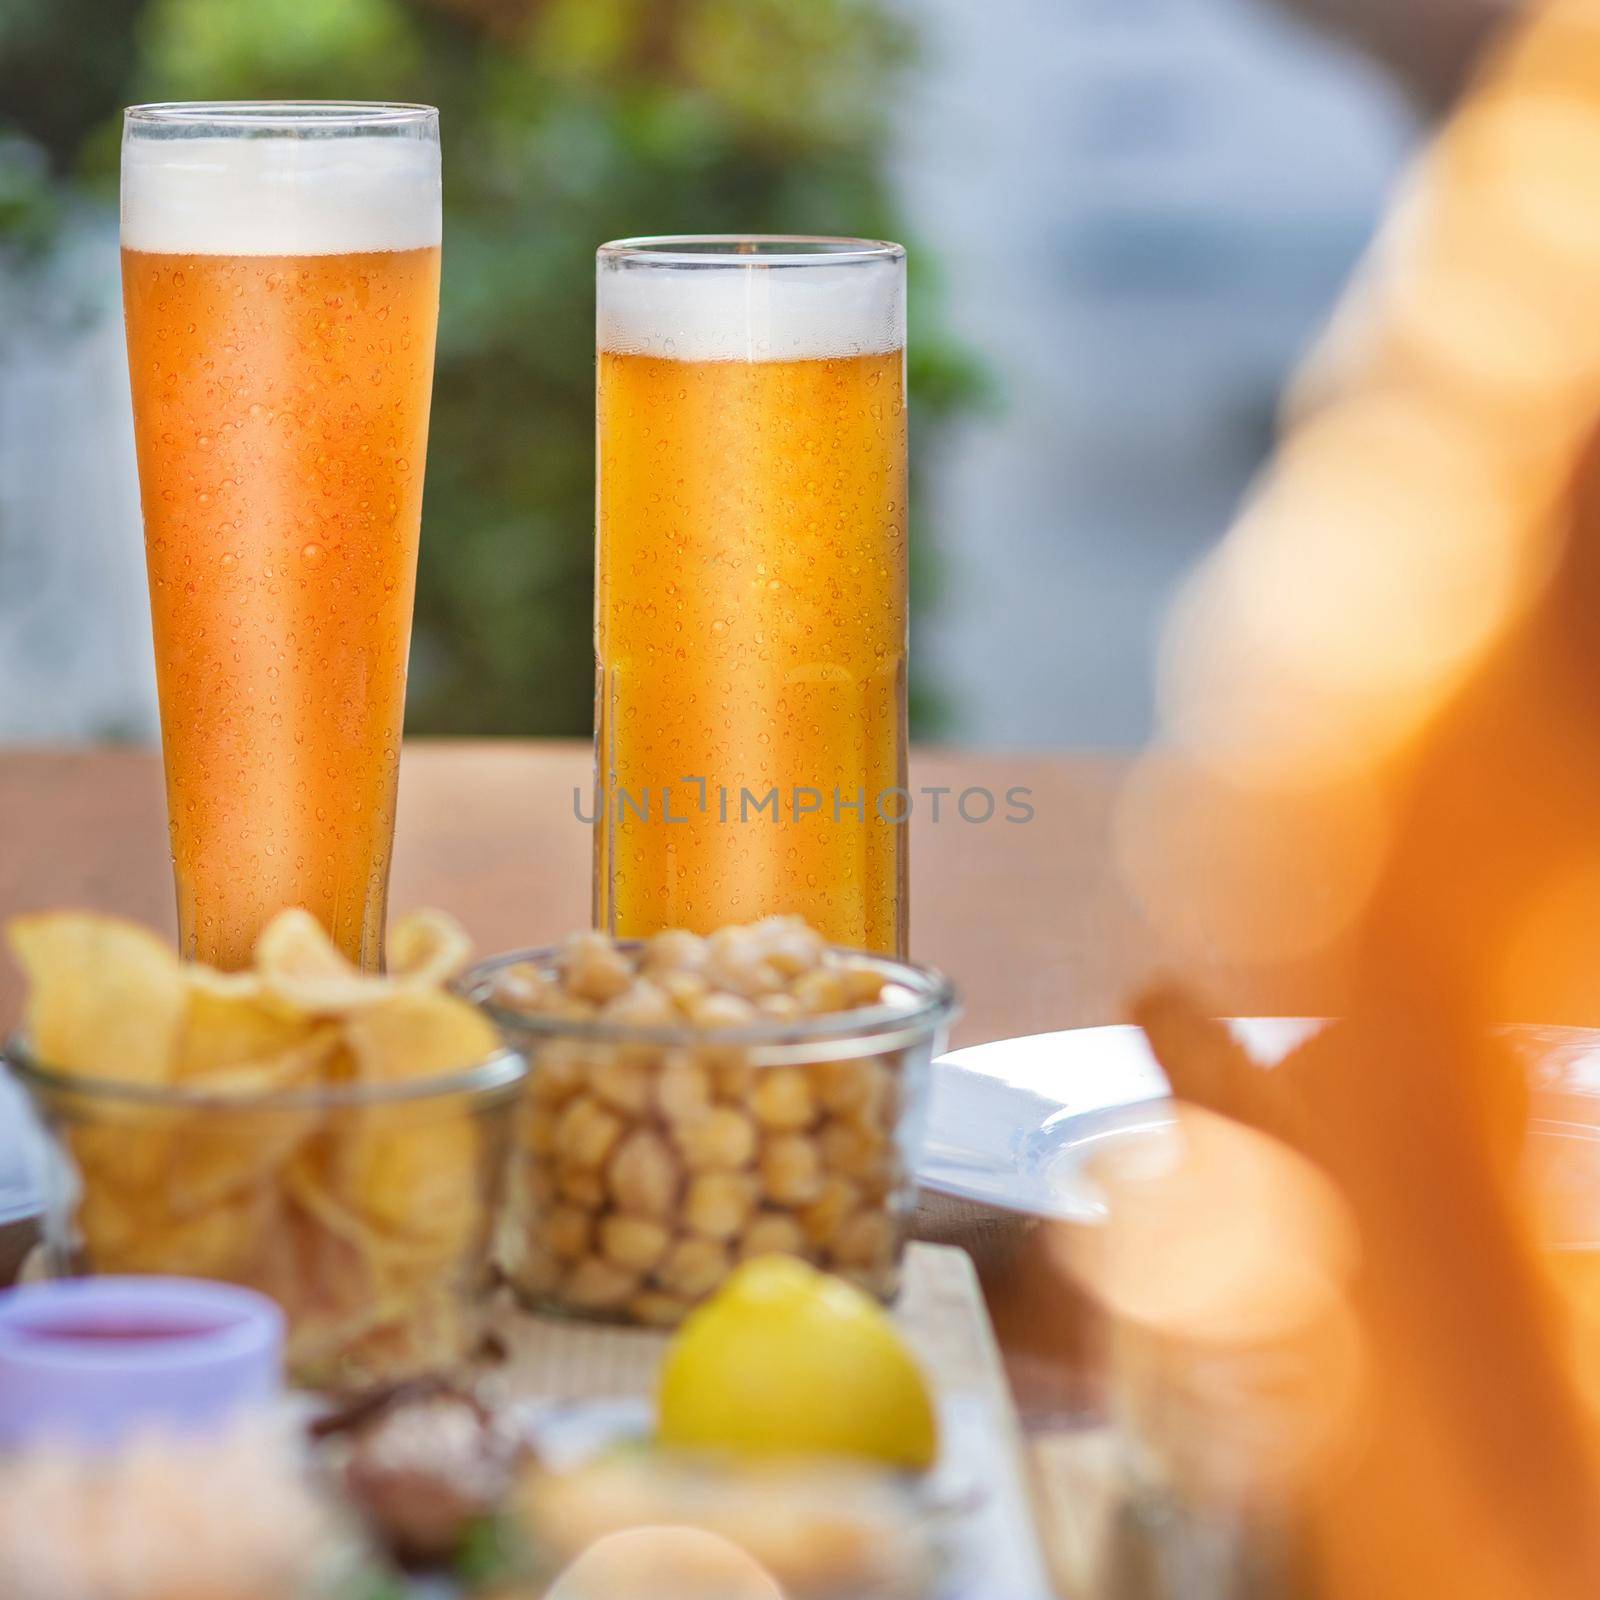 Beer mugs, glasses with snacks on the table